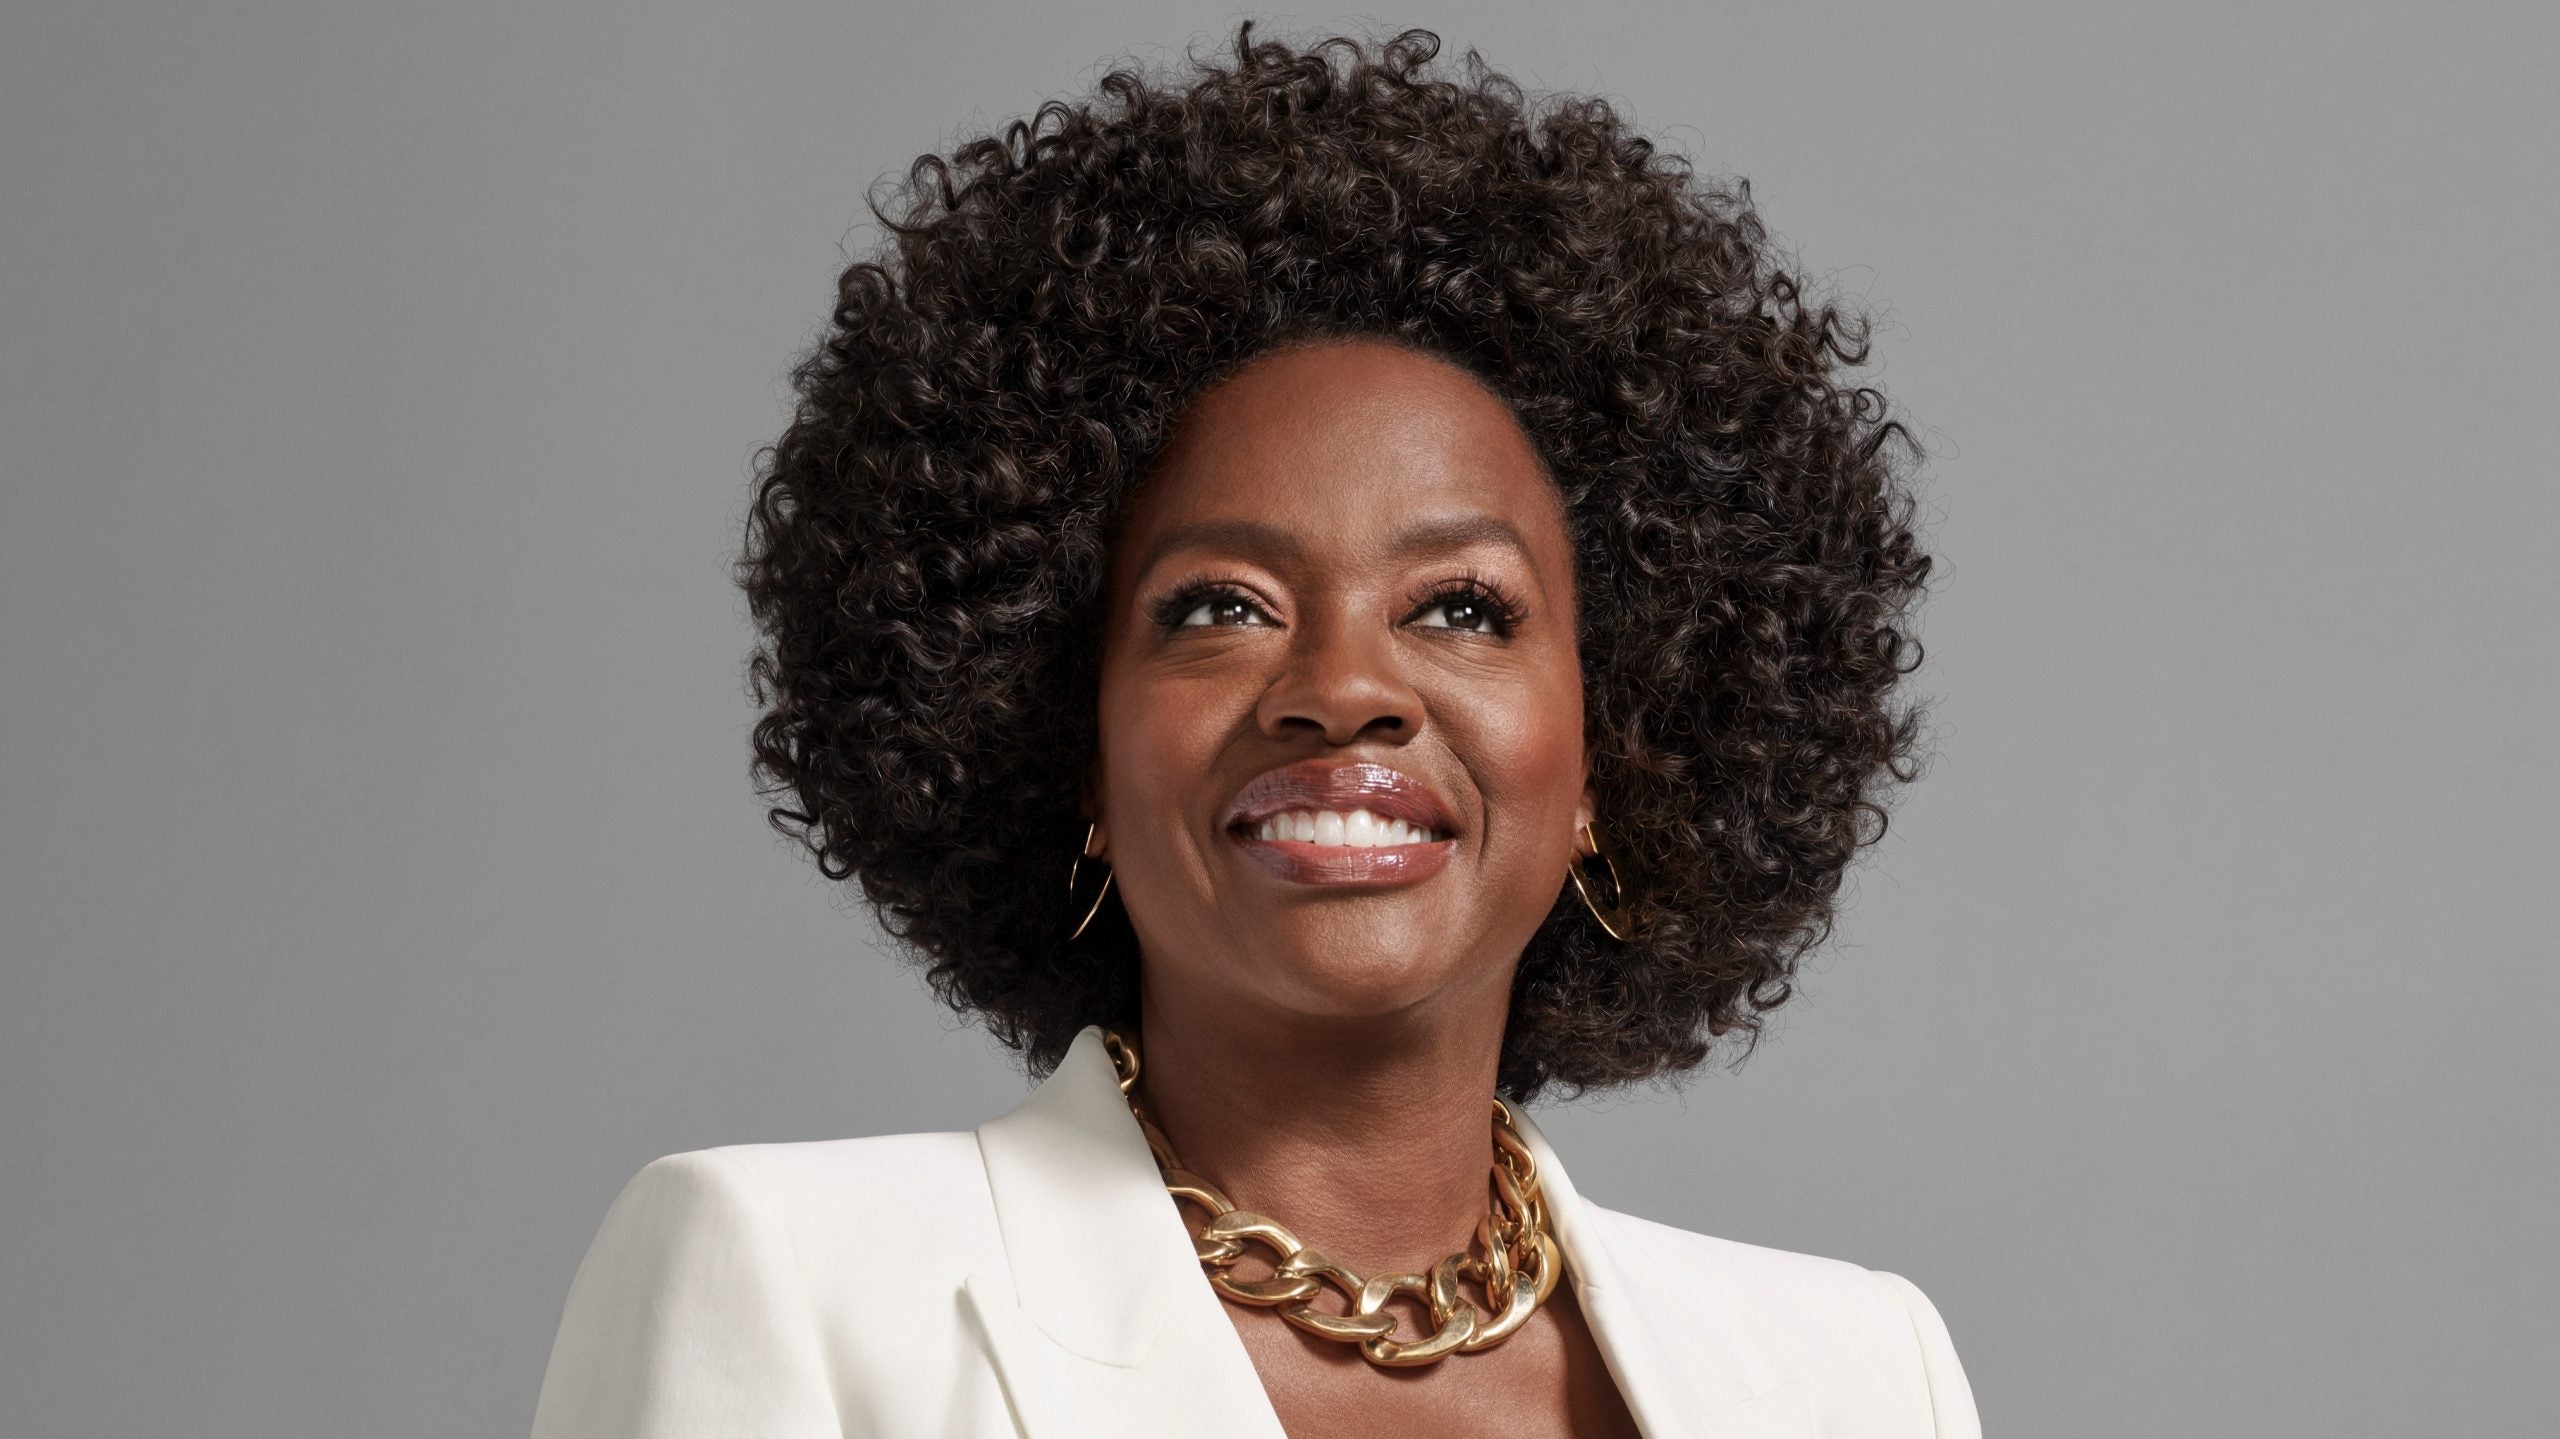 Actress Viola Davis On The Beauty Of Aging And The Importance Of